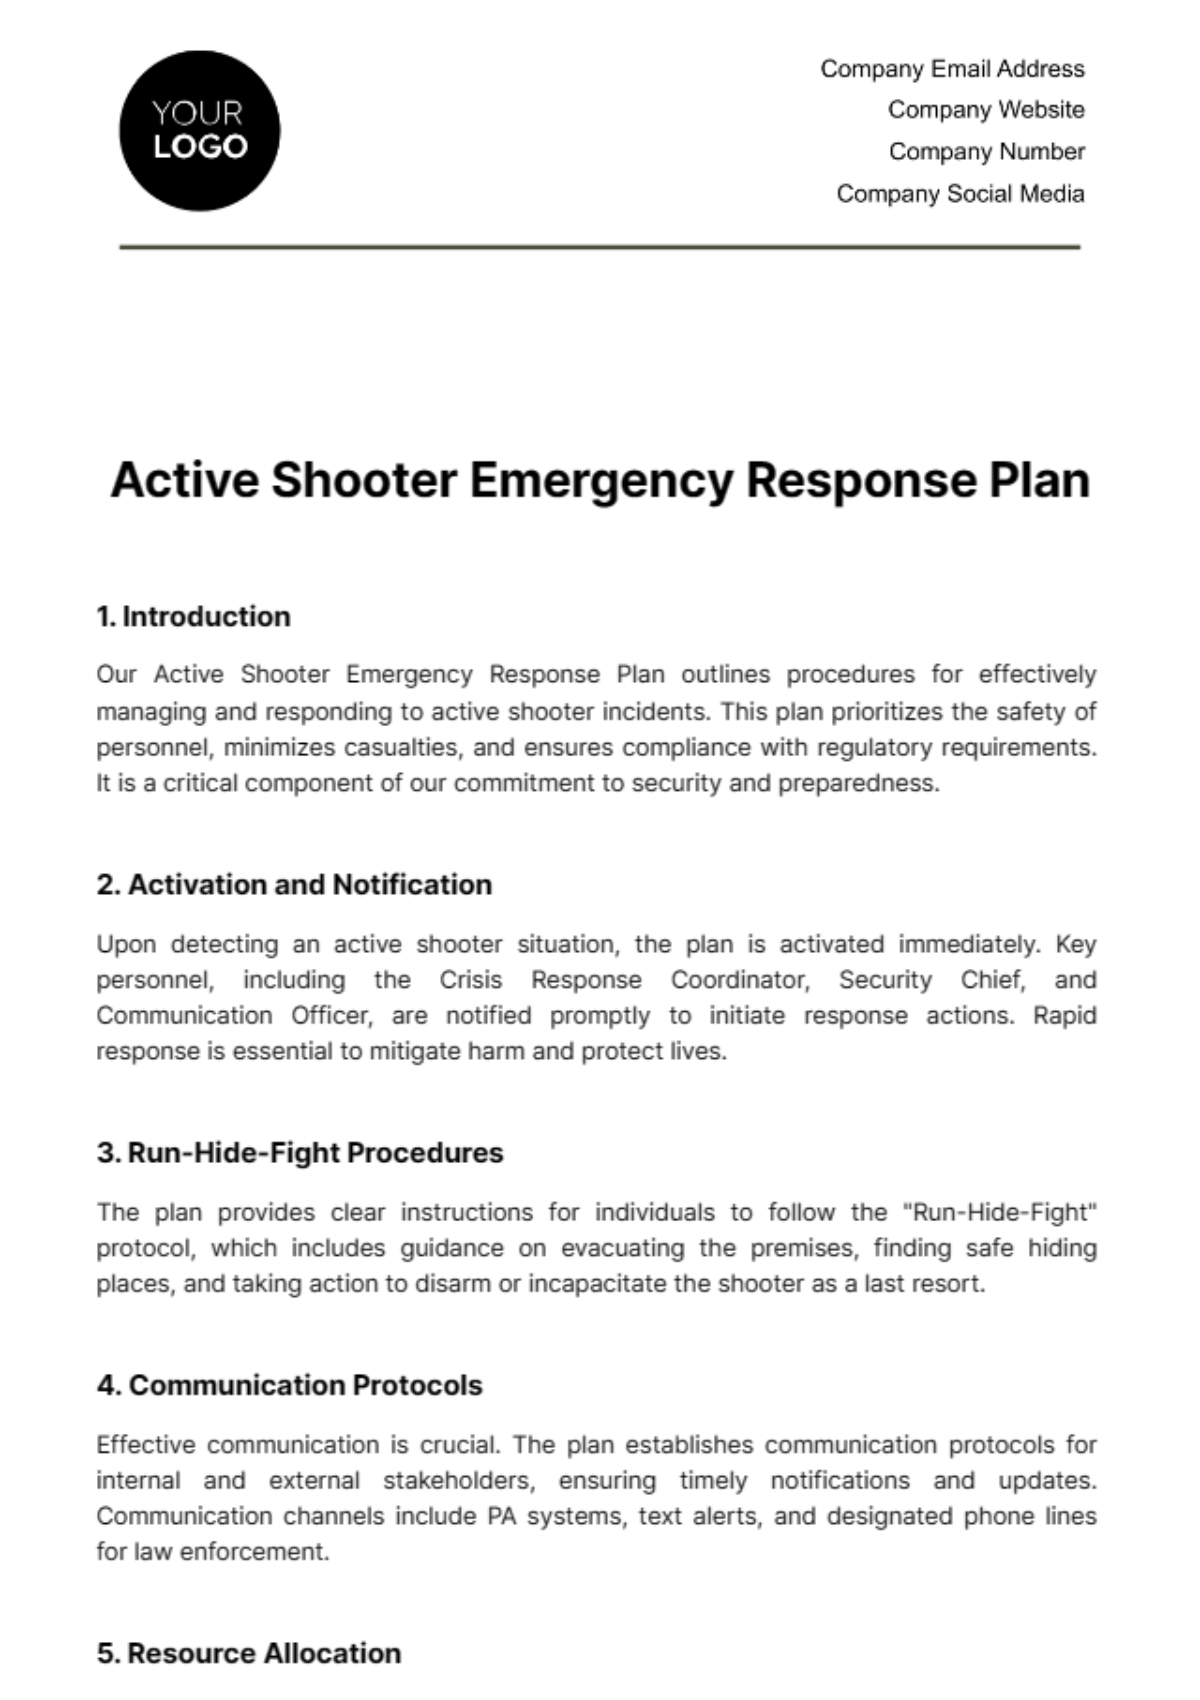 Free Active Shooter Emergency Response Plan Template